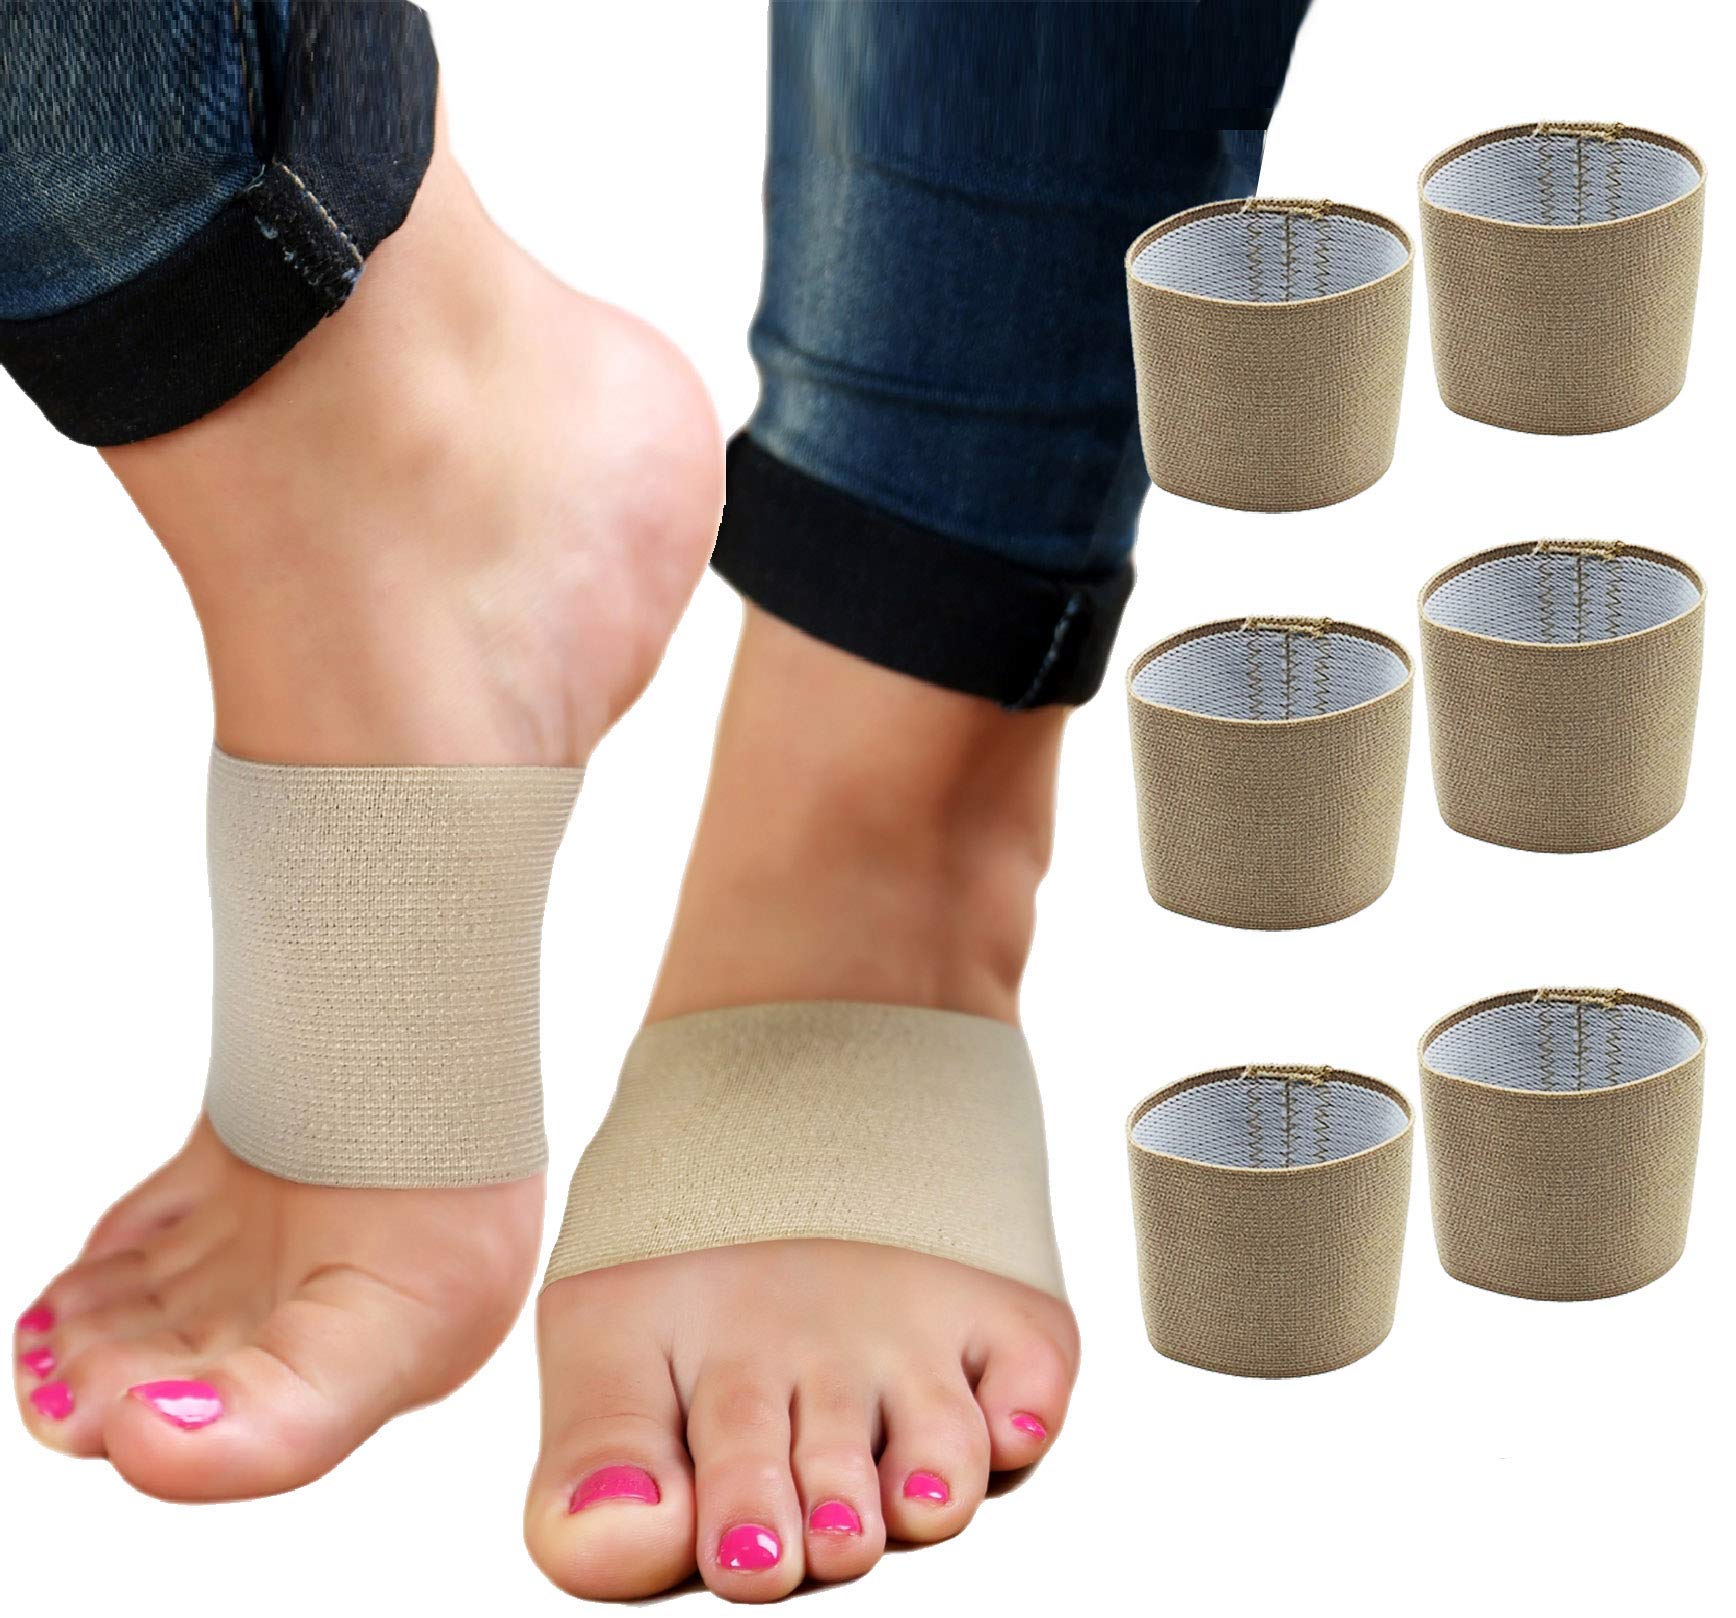 Copper Compression Arch Support - 4 Plantar Fasciitis Braces/Sleeves. Foot  Care, Heel Spurs, Feet Pain Relief, Flat & Fallen Arches, High Arch